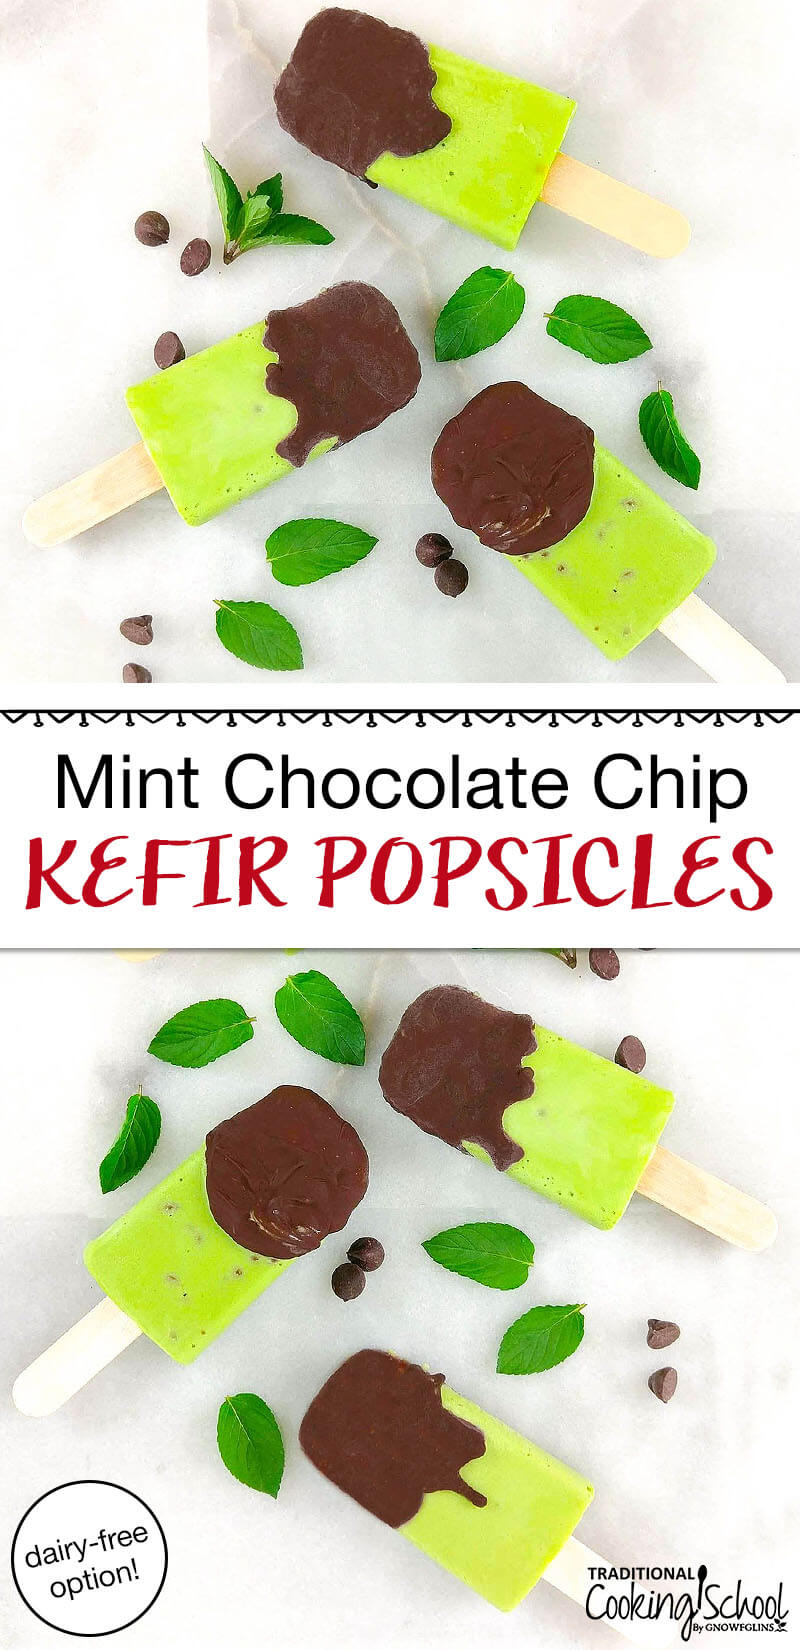 bright green popsicles dipped in chocolate with text overlay: "Mint Chocolate Chip Kefir Popsicles (dairy-free option!)"